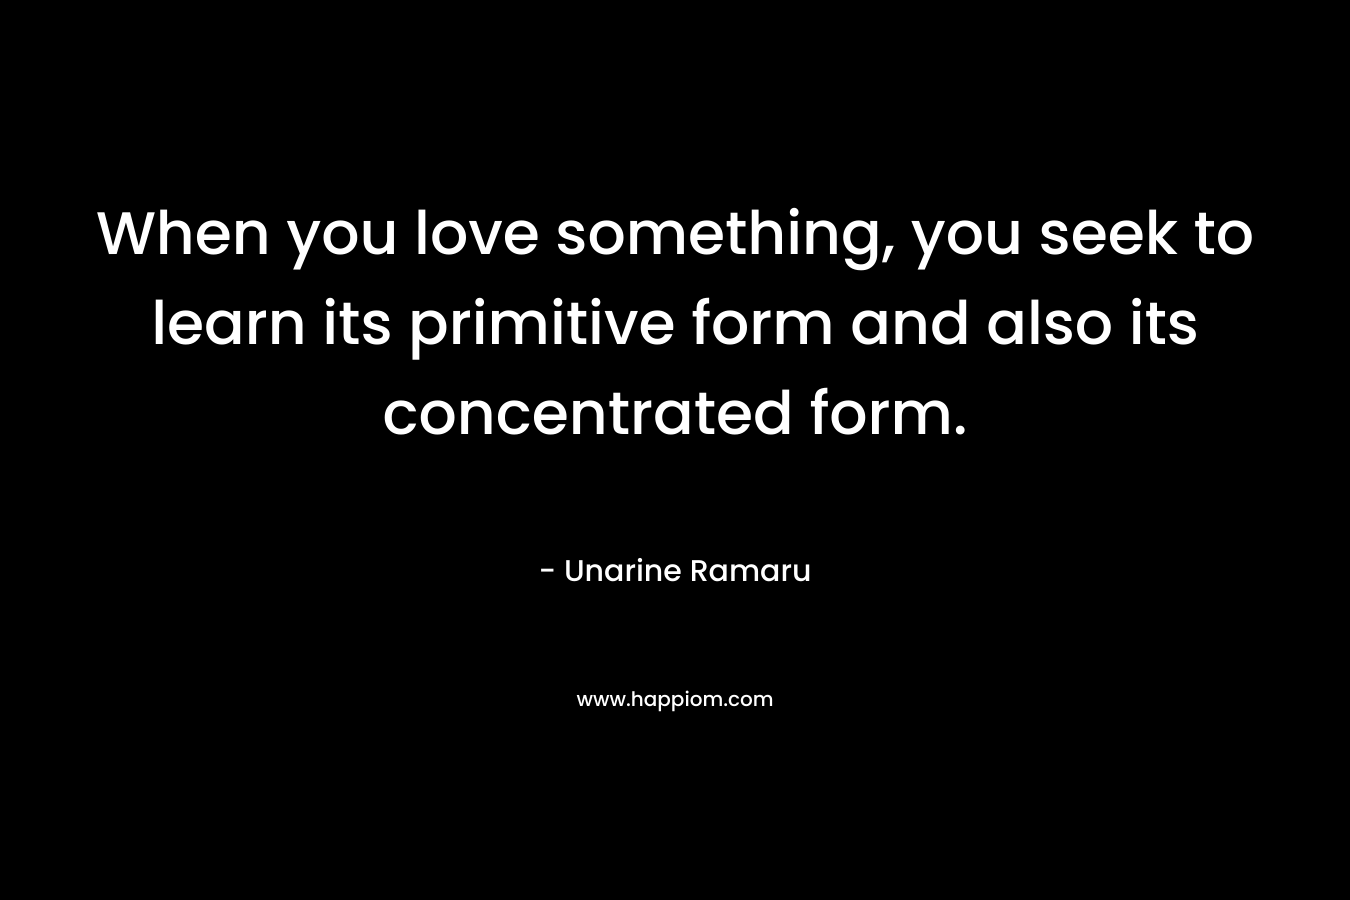 When you love something, you seek to learn its primitive form and also its concentrated form.